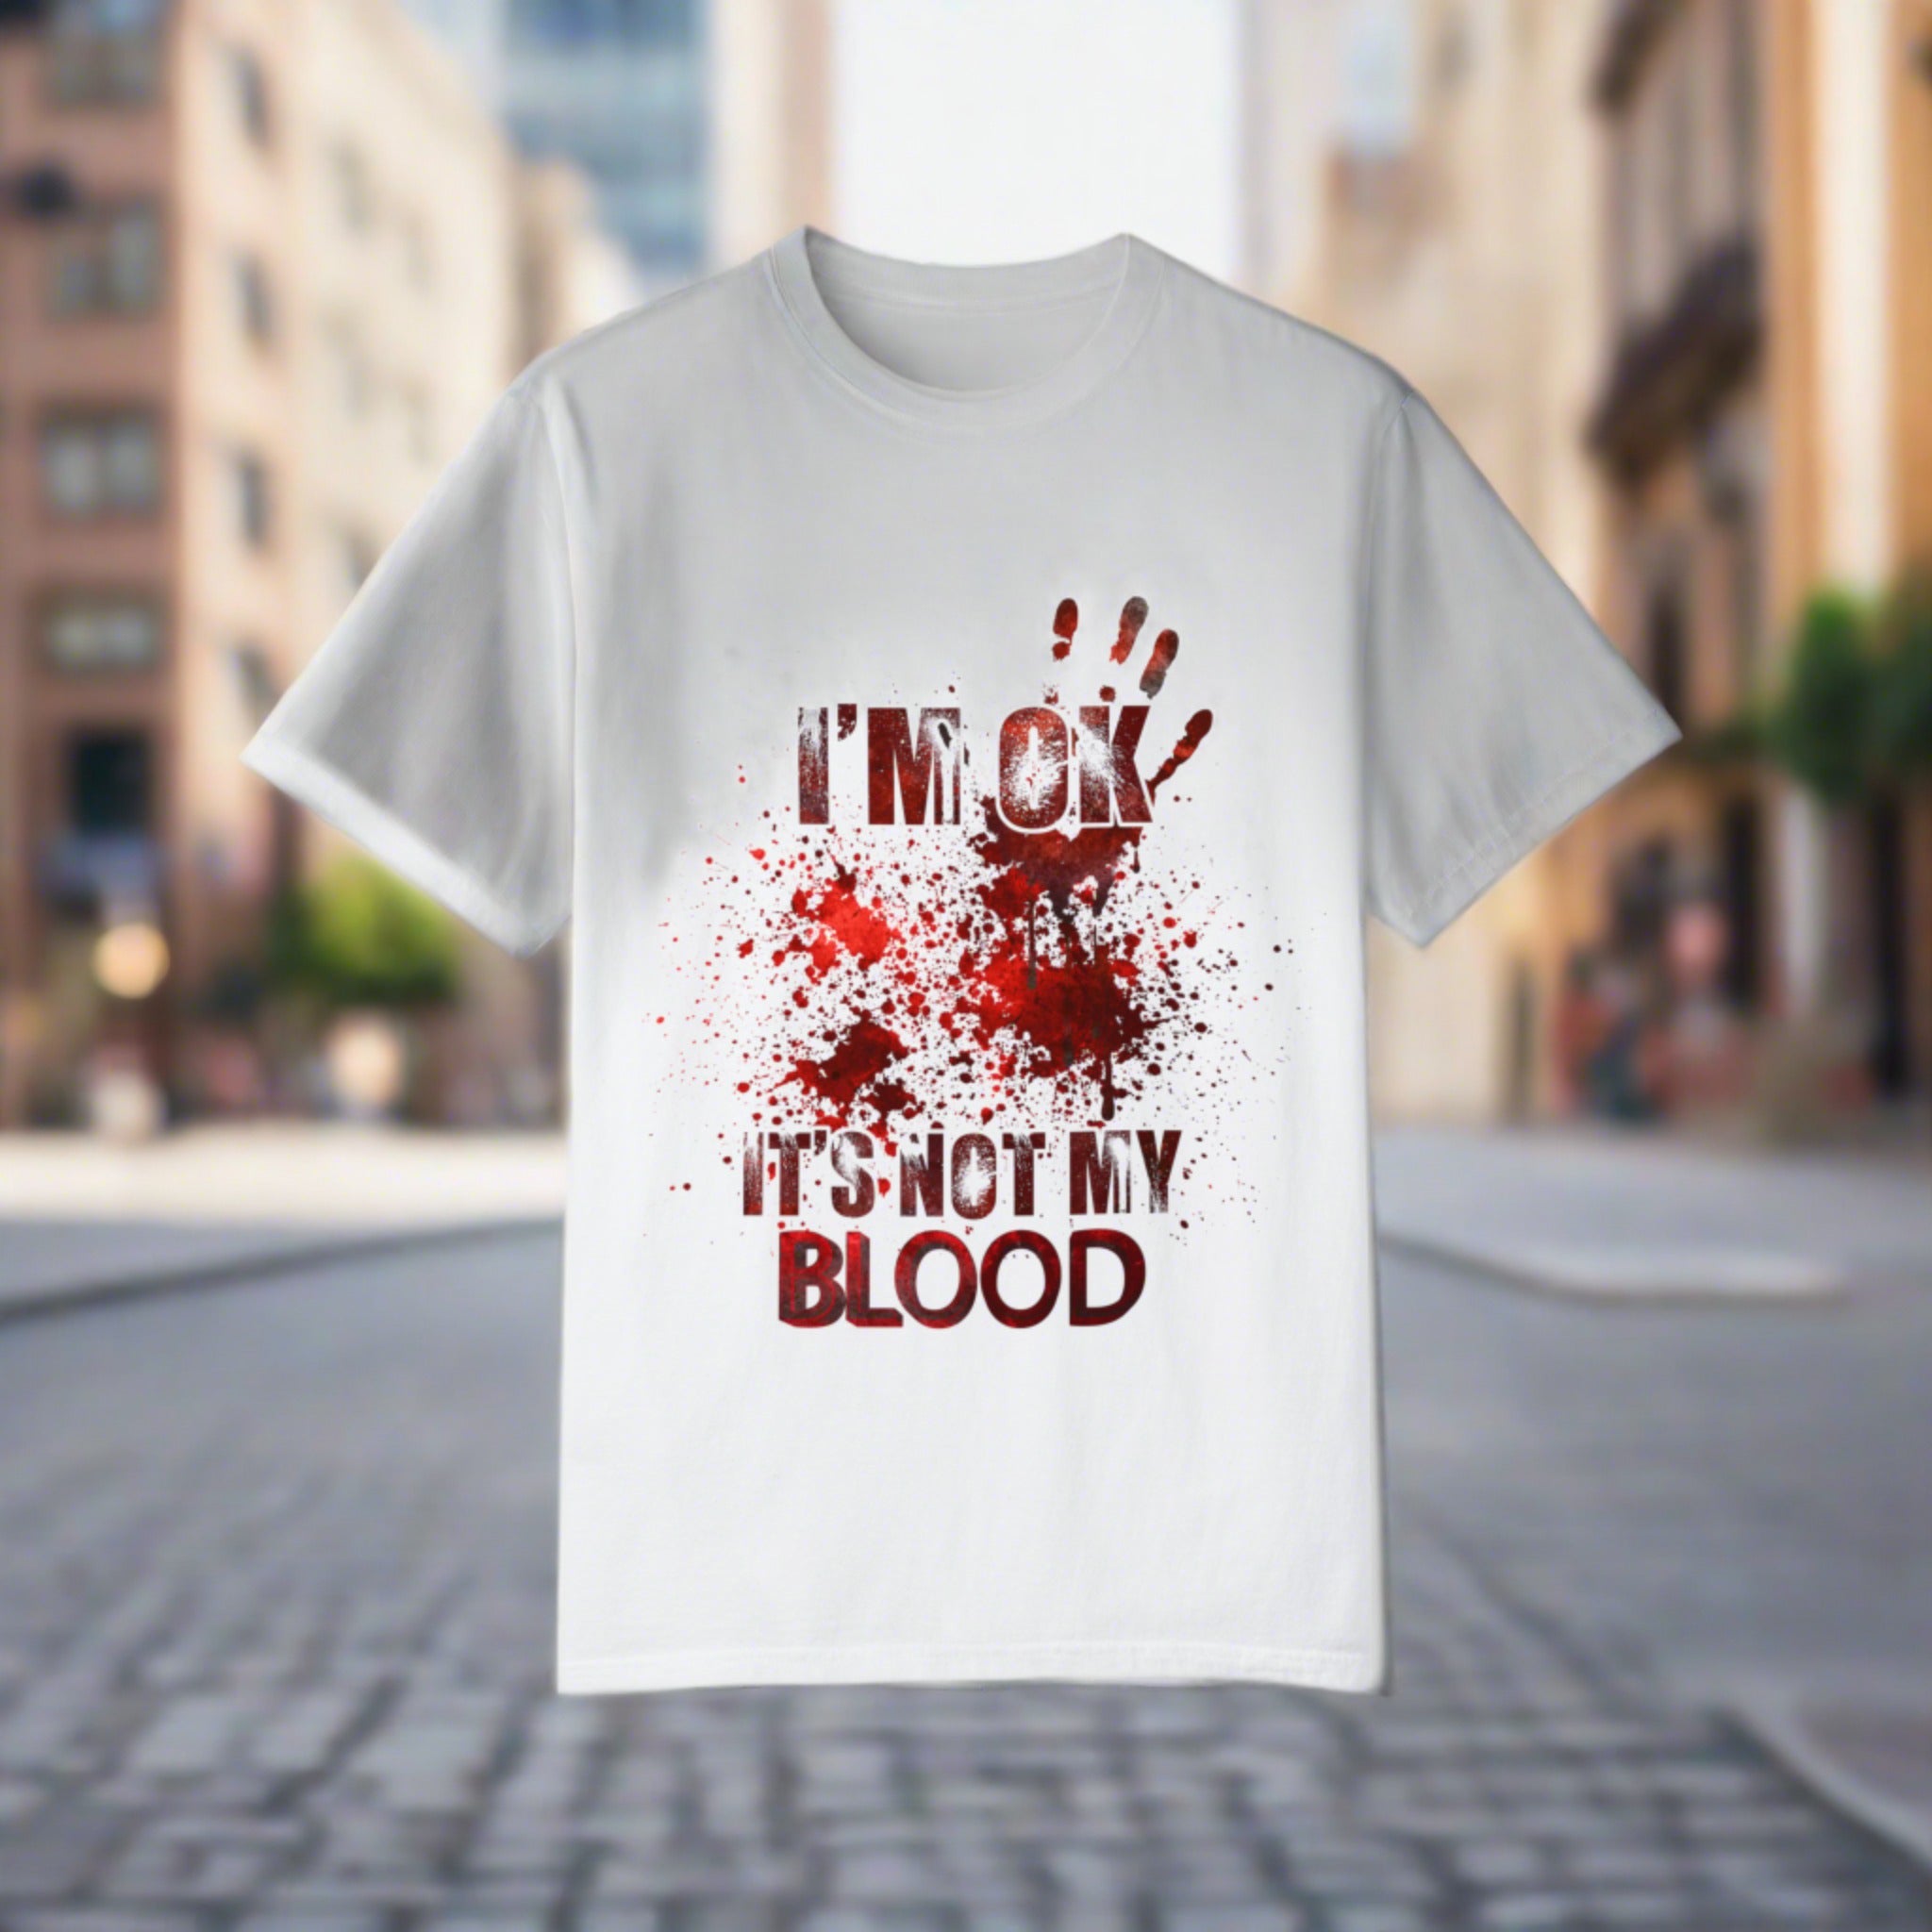 The image features a unisex garment-dyed t-shirt displaying a humorous scene of a zombie fight with the text "I'm OK..." splashed across in bold, eye-catching letters. The design emphasizes both the comedy and the horror elements, perfectly balancing the two for fans of both genres. The shirt's quality fabric and faded color palette enhance the vintage, laid-back vibe, making it an essential addition to any casual wardrobe.